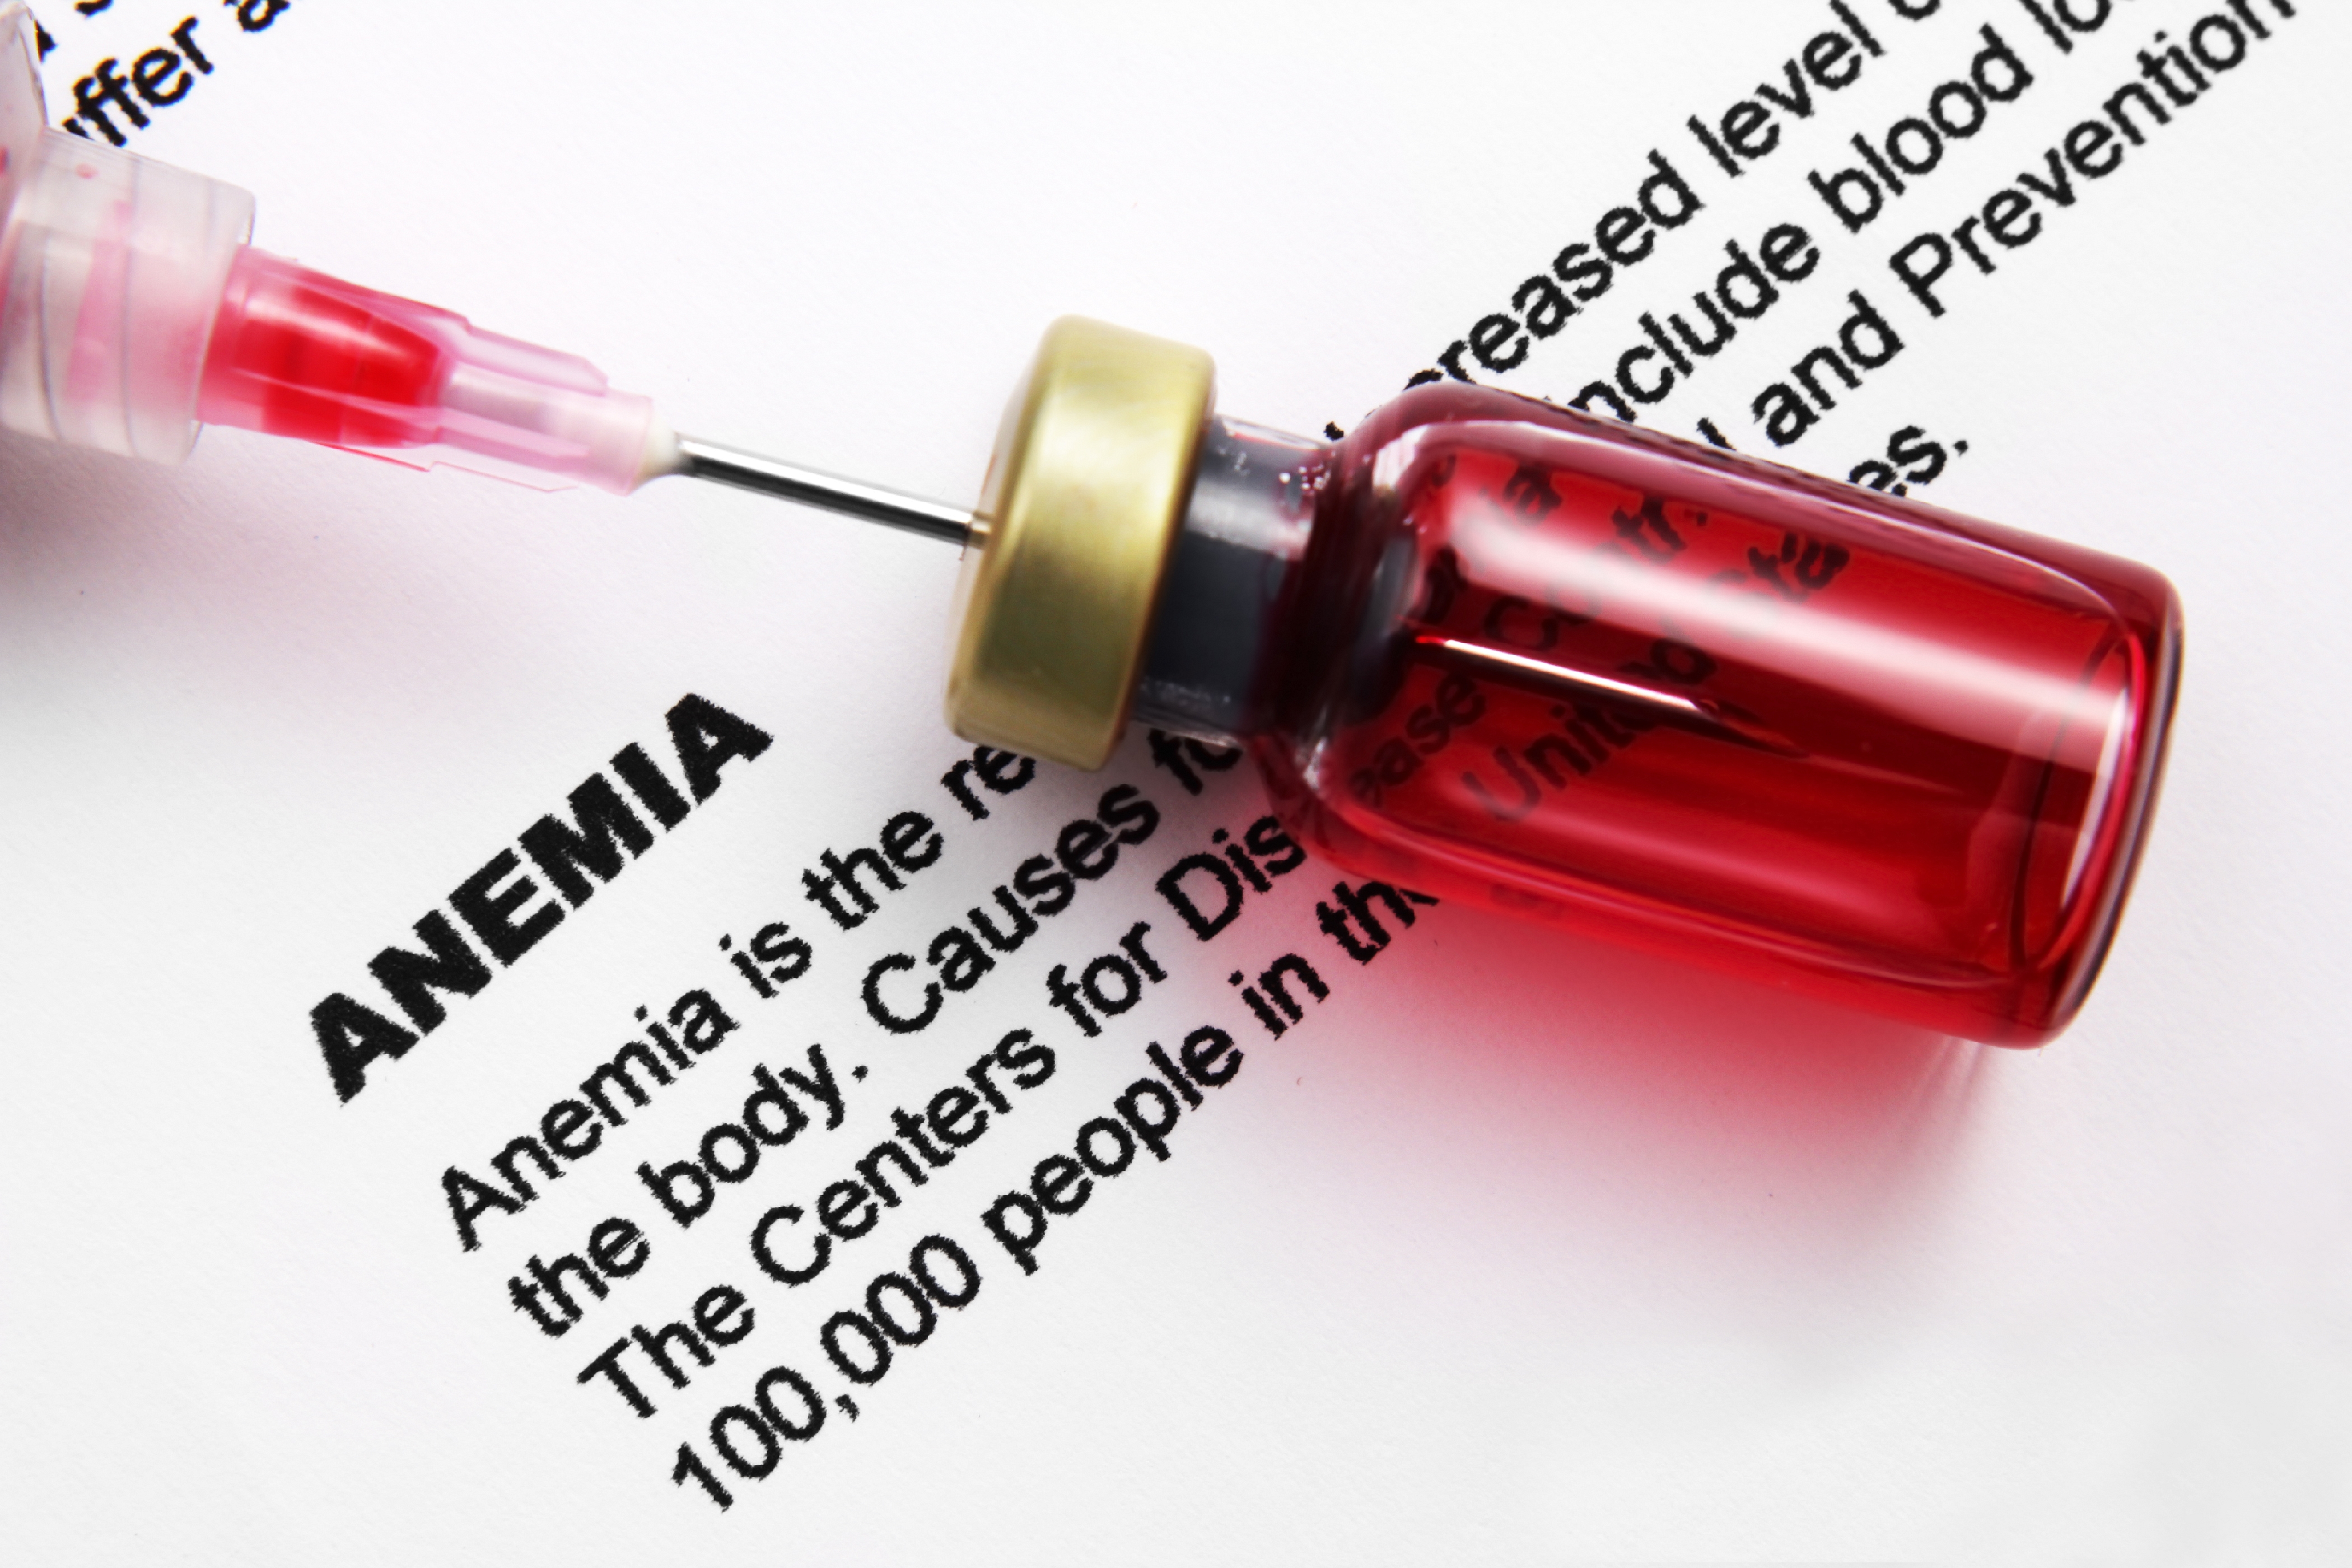 Can A Proper Diet Help Treat Anemia?